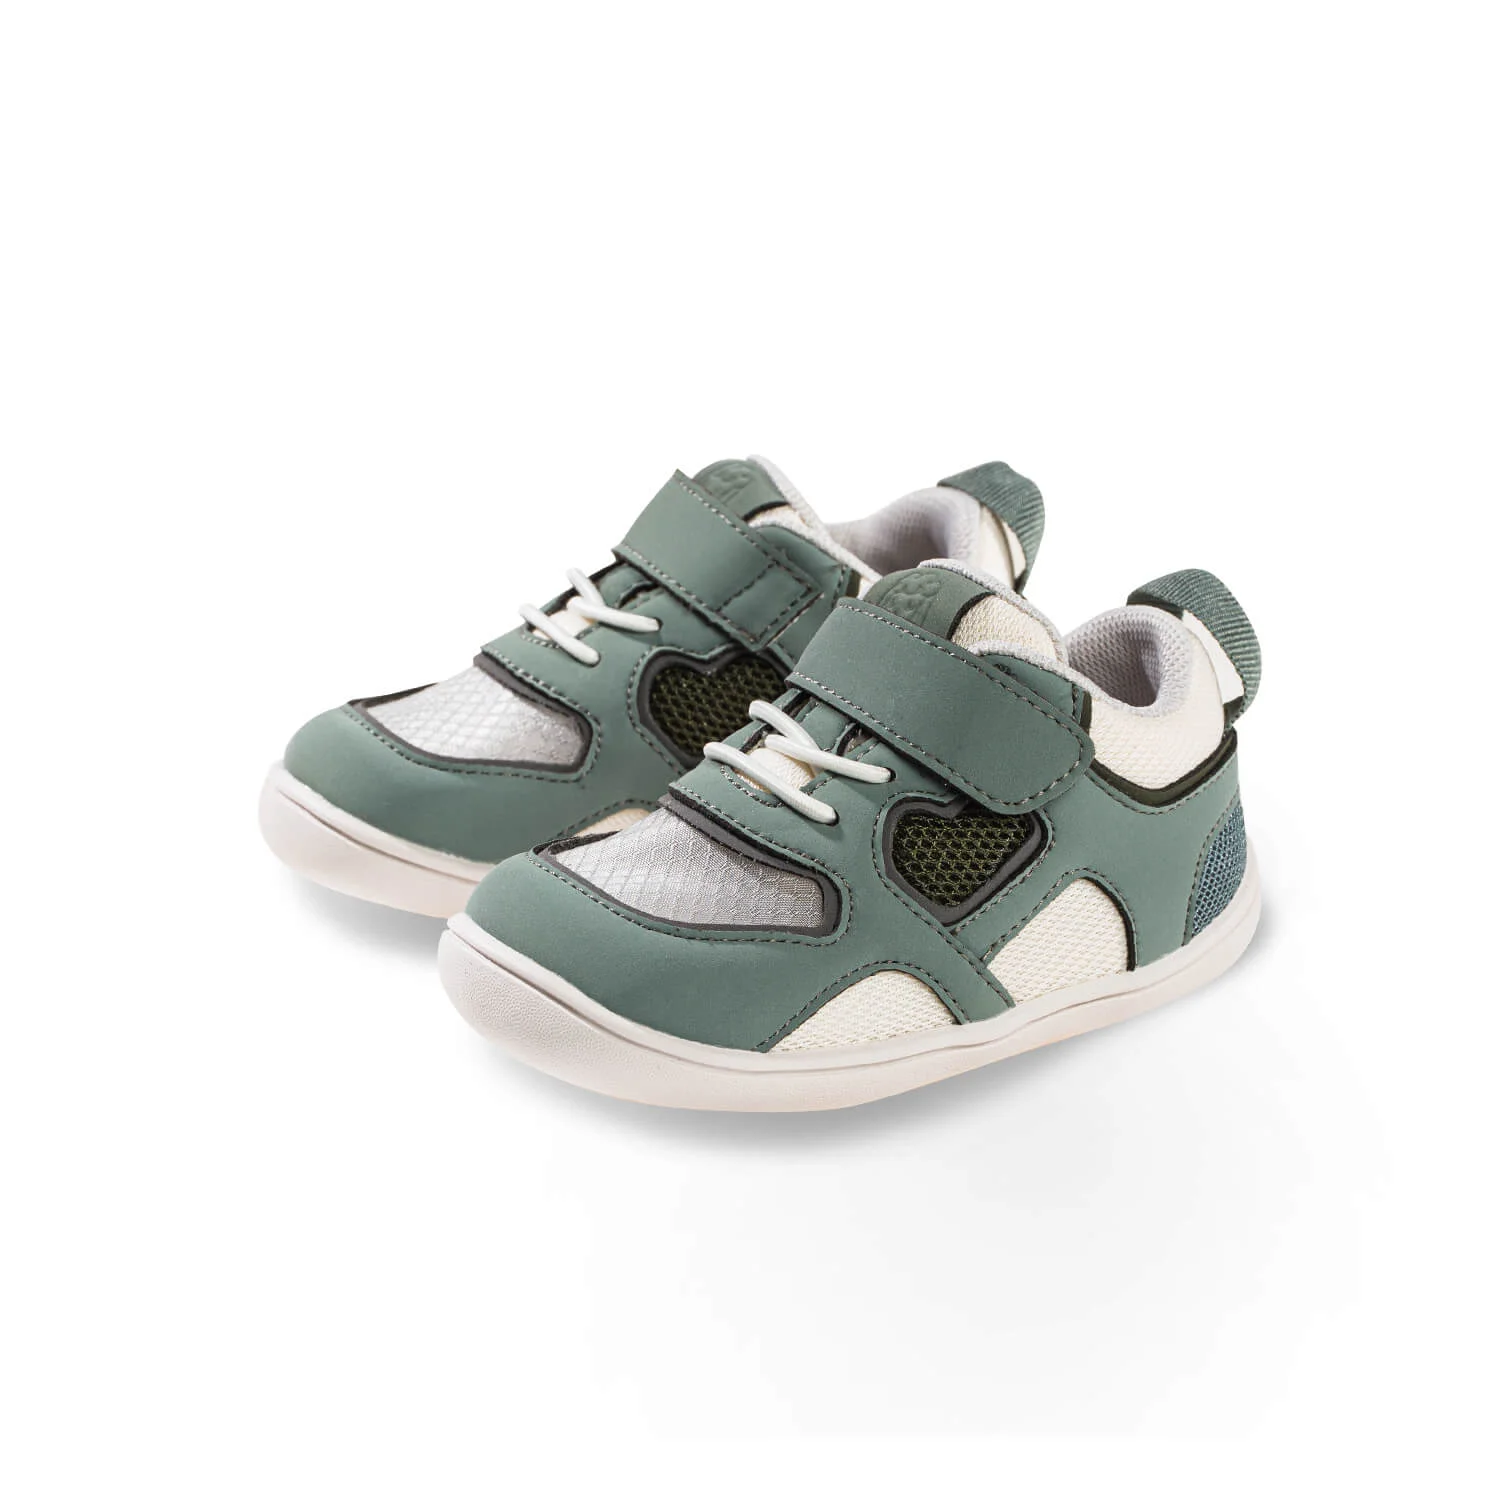 Little blue lamb BABY - Airplane grey/šede/